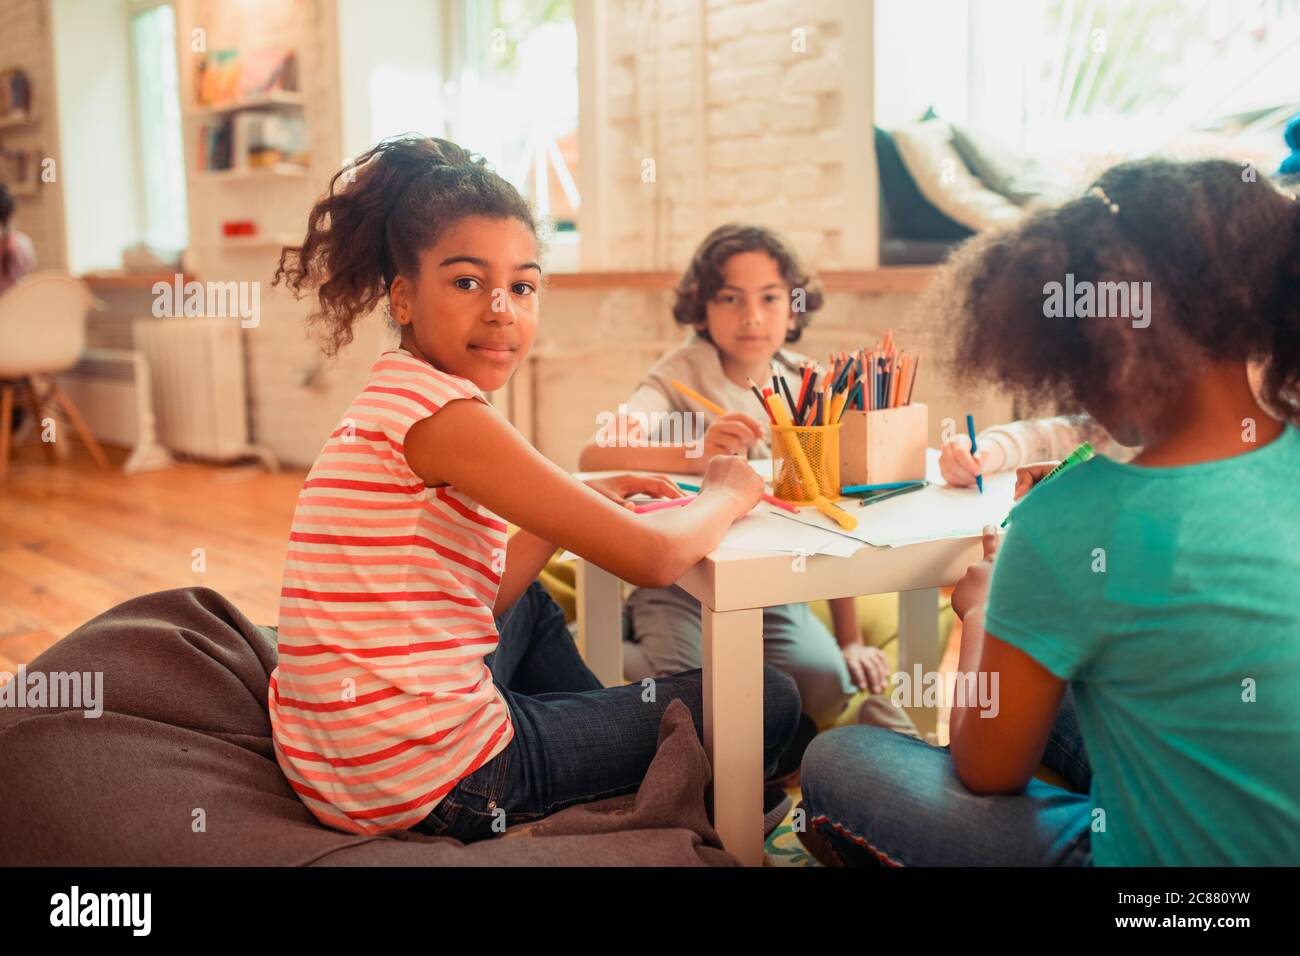 African-American girl drawing together with her peers Stock Photo